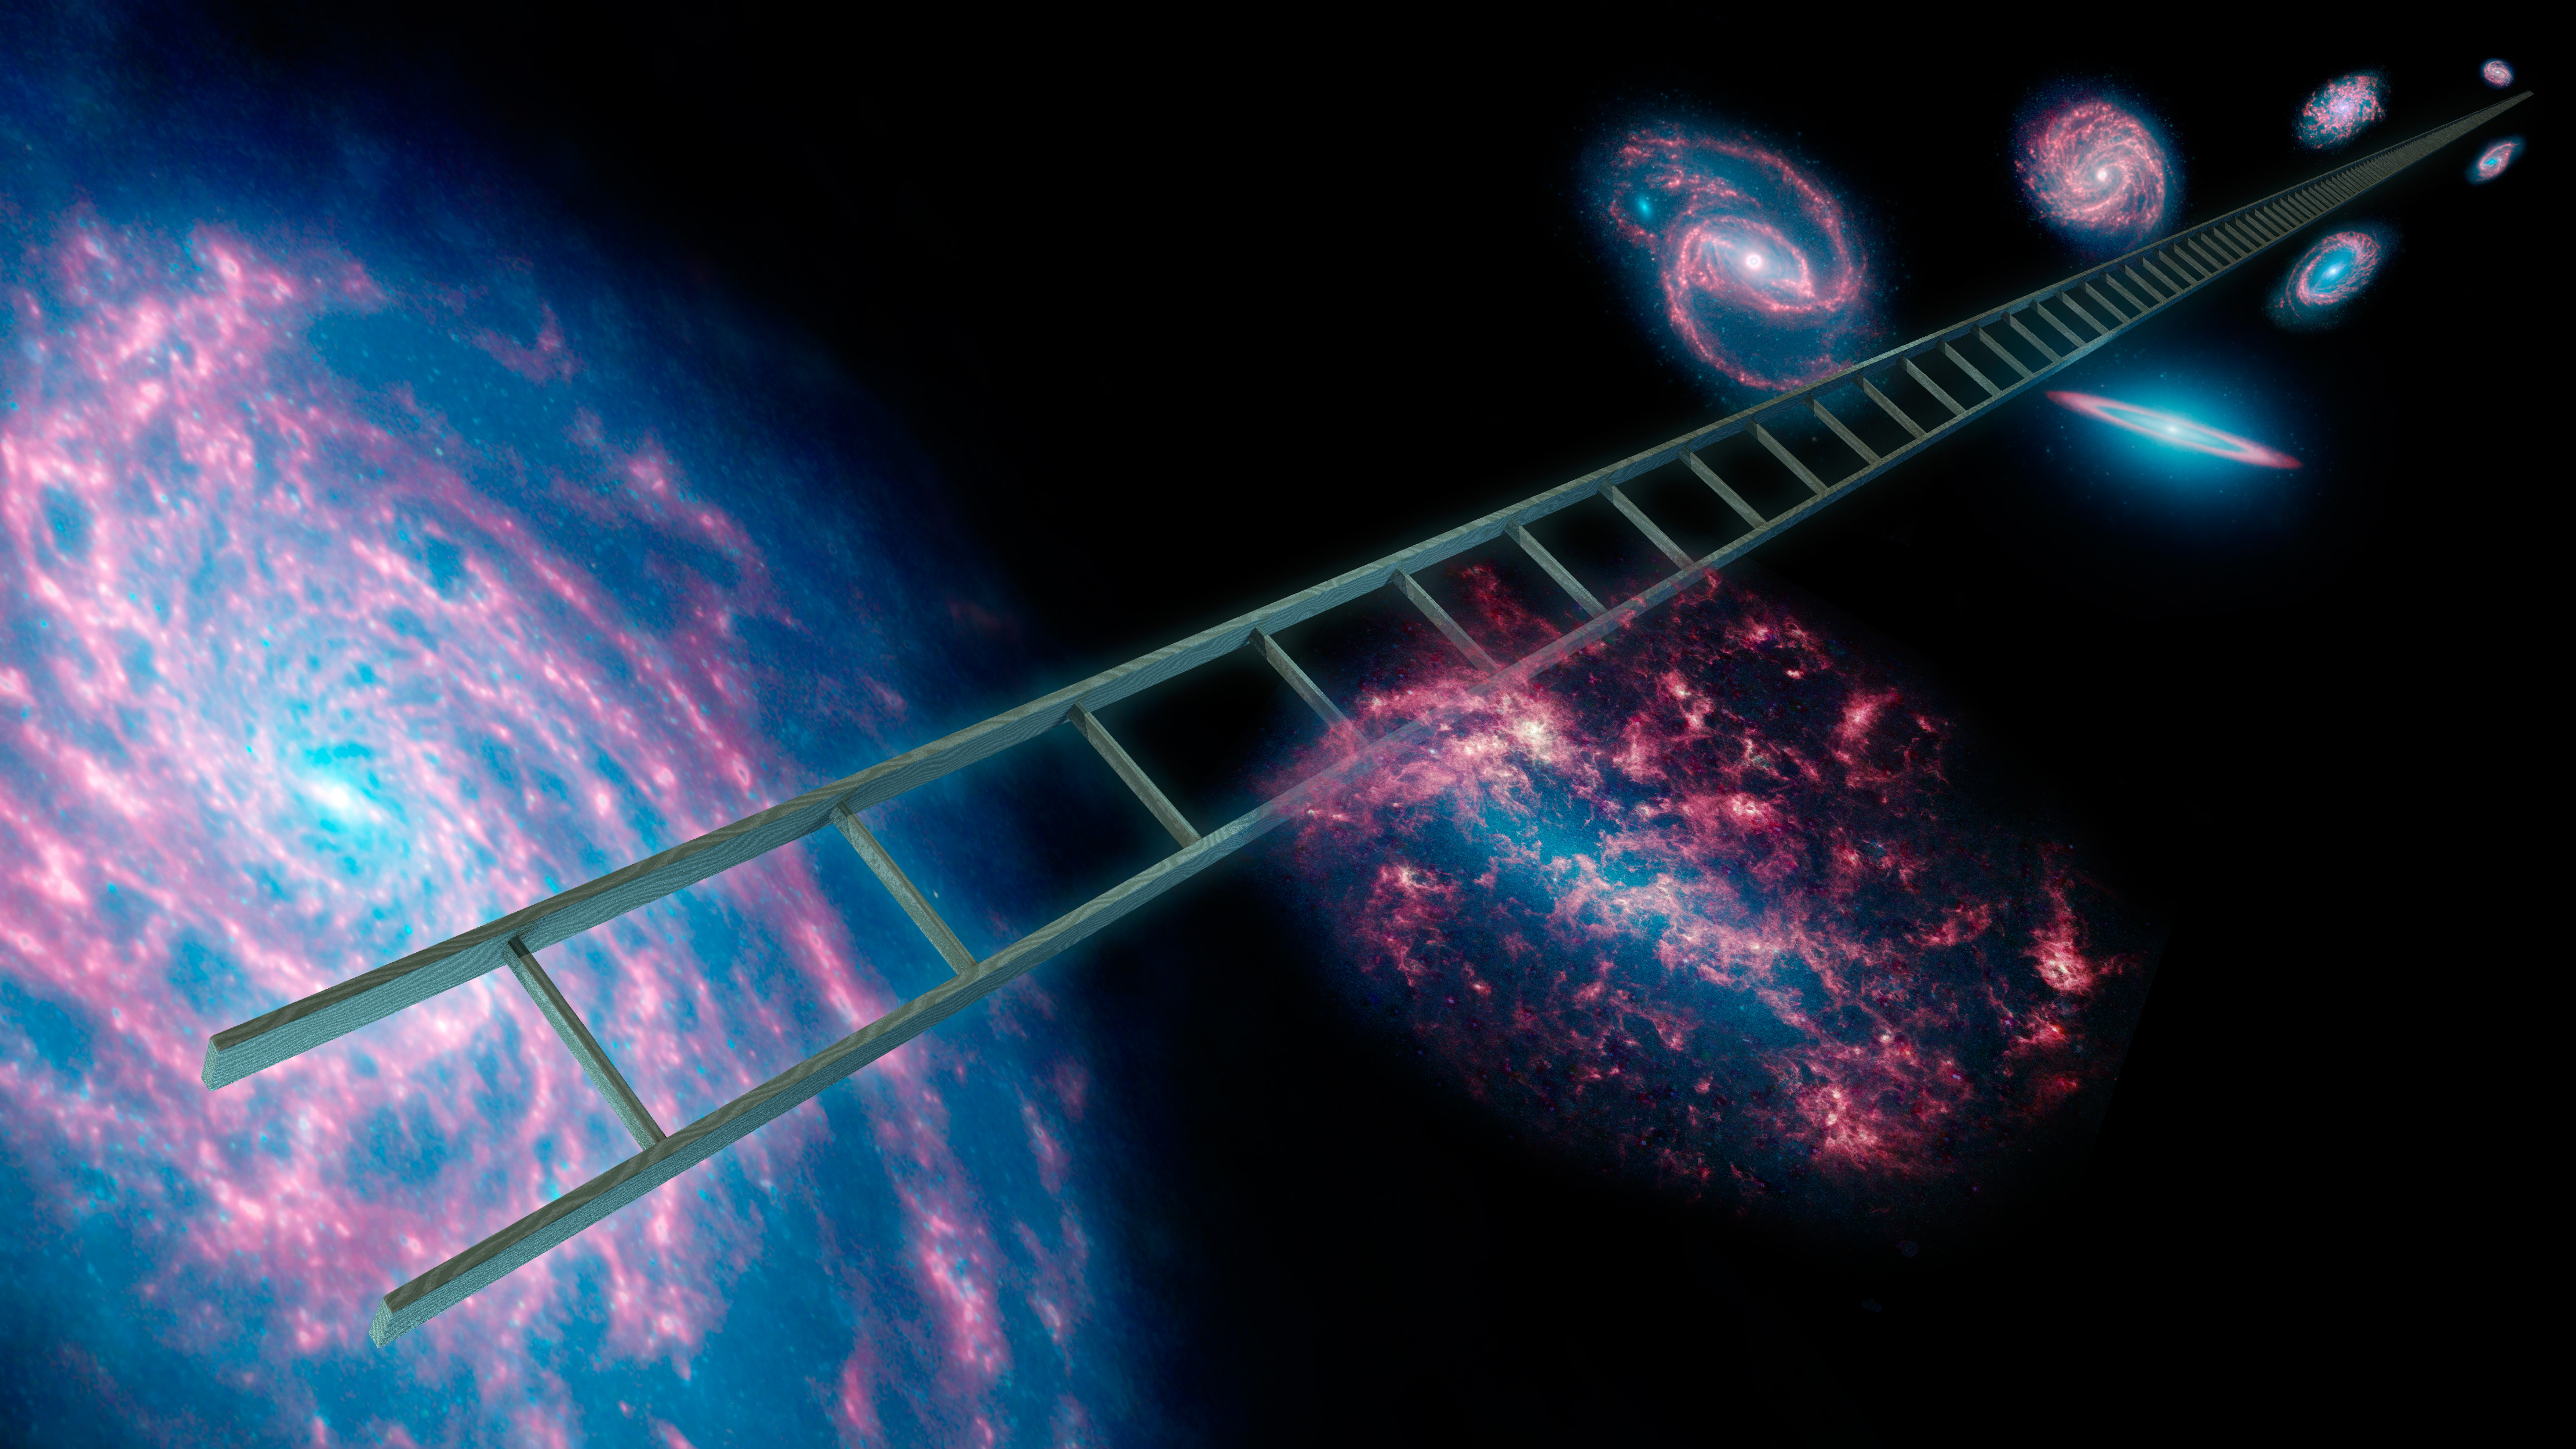 Astronomers using NASA’s Spitzer Space Telescope have greatly improved the cosmic distance ladder used to measure the size and age of the universe, symbolically rendered in this artist’s concept.